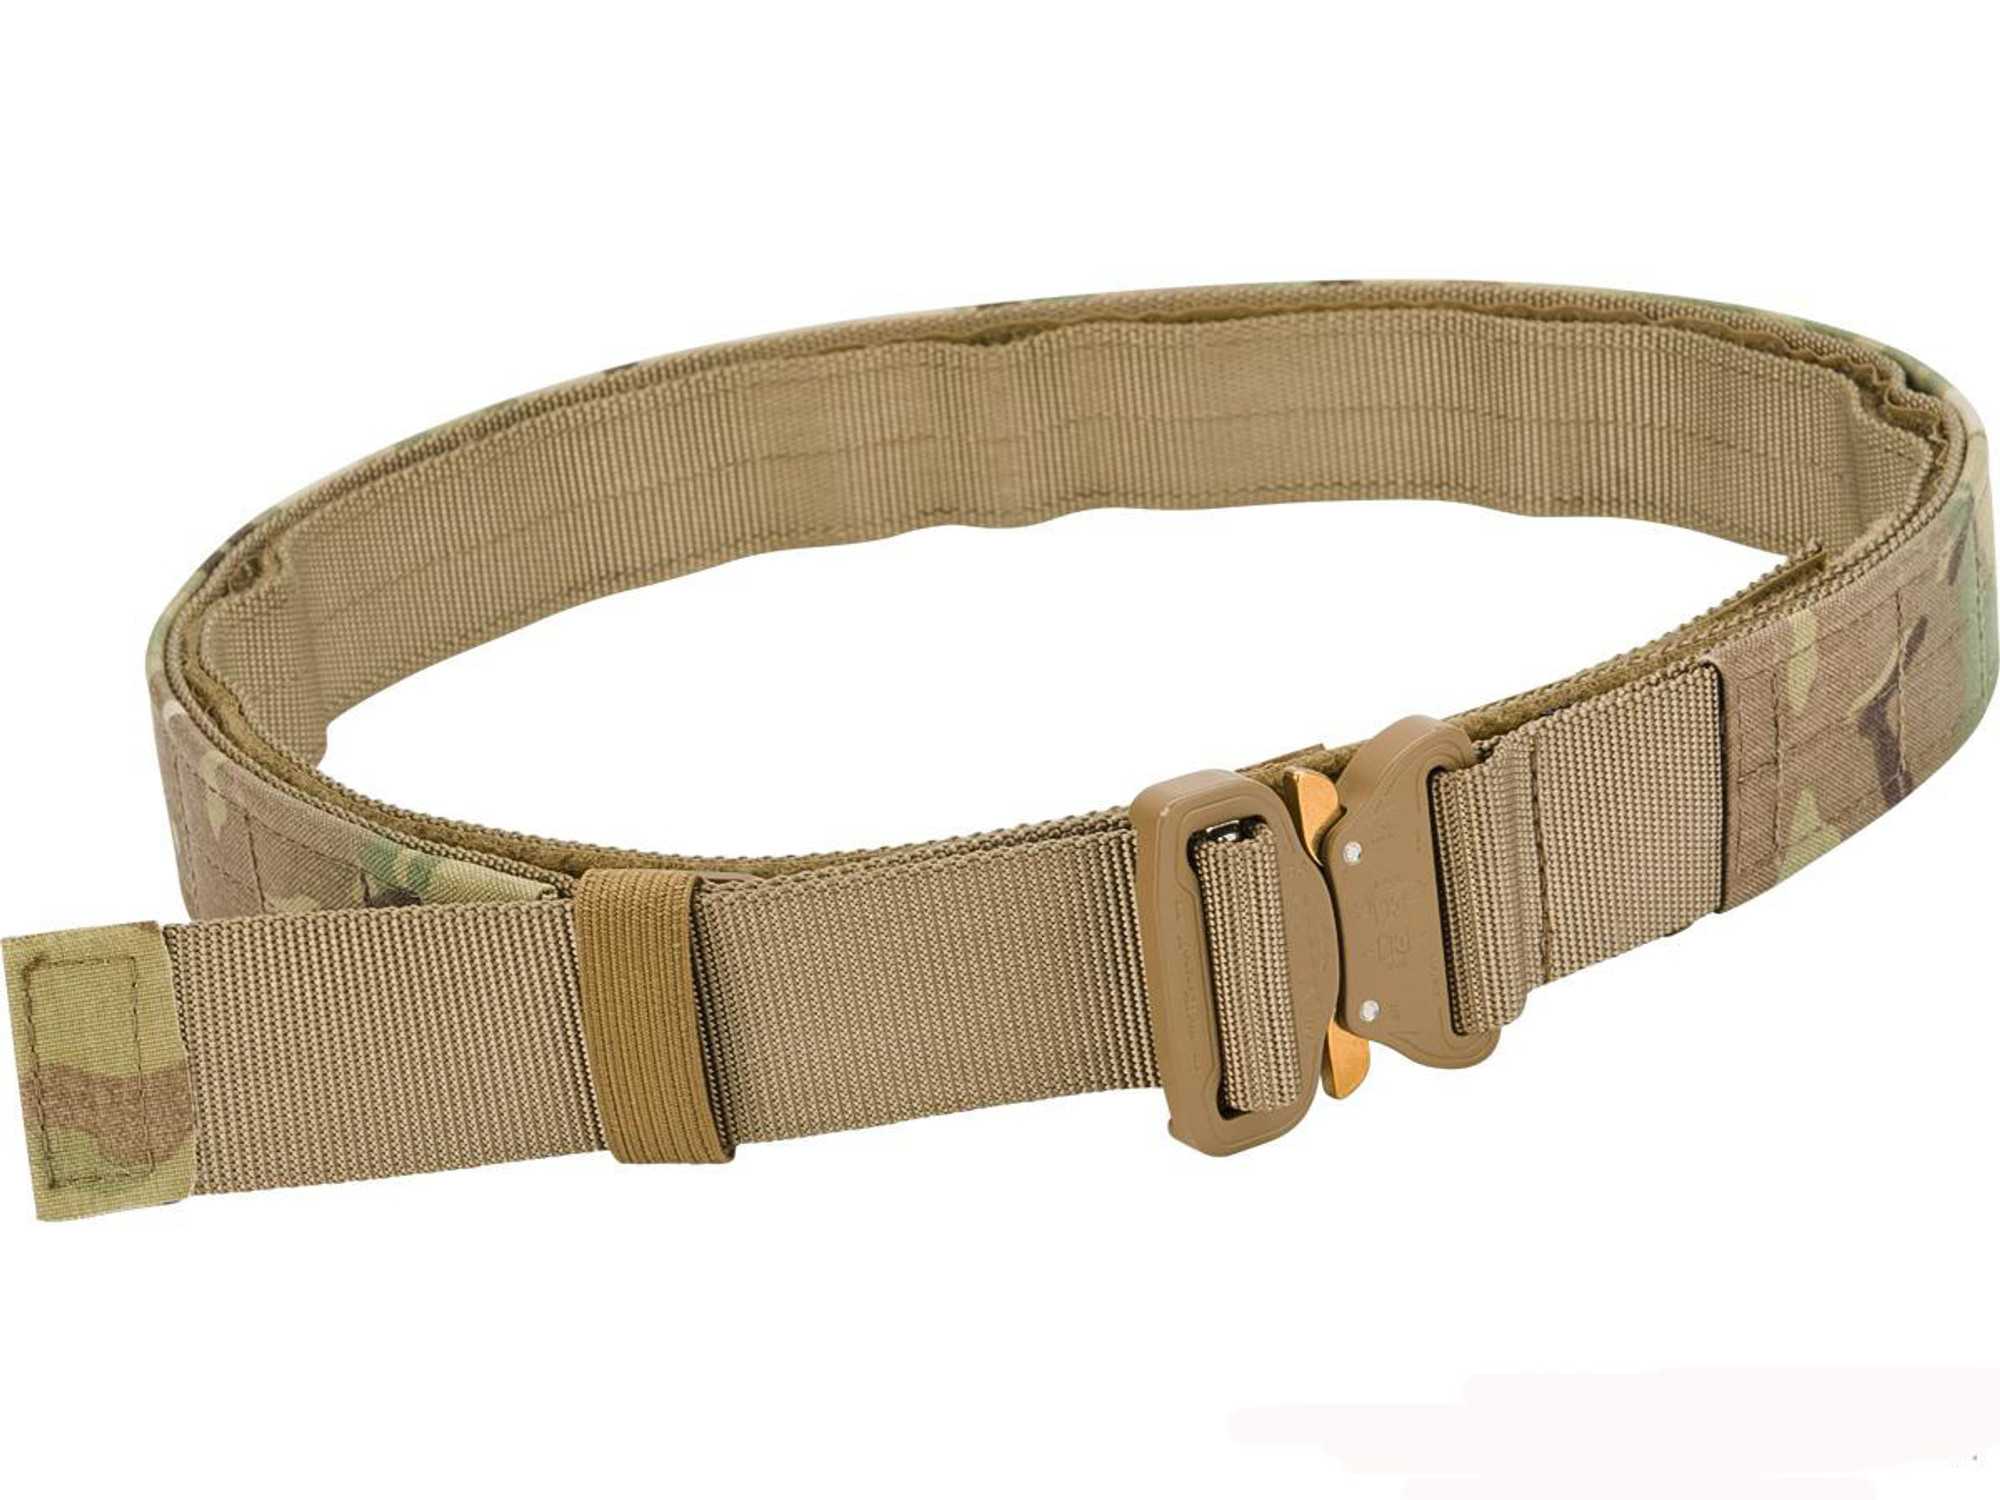 G-Code Contact Series 1.75" Operator Belt (Color: Multicam / Large)